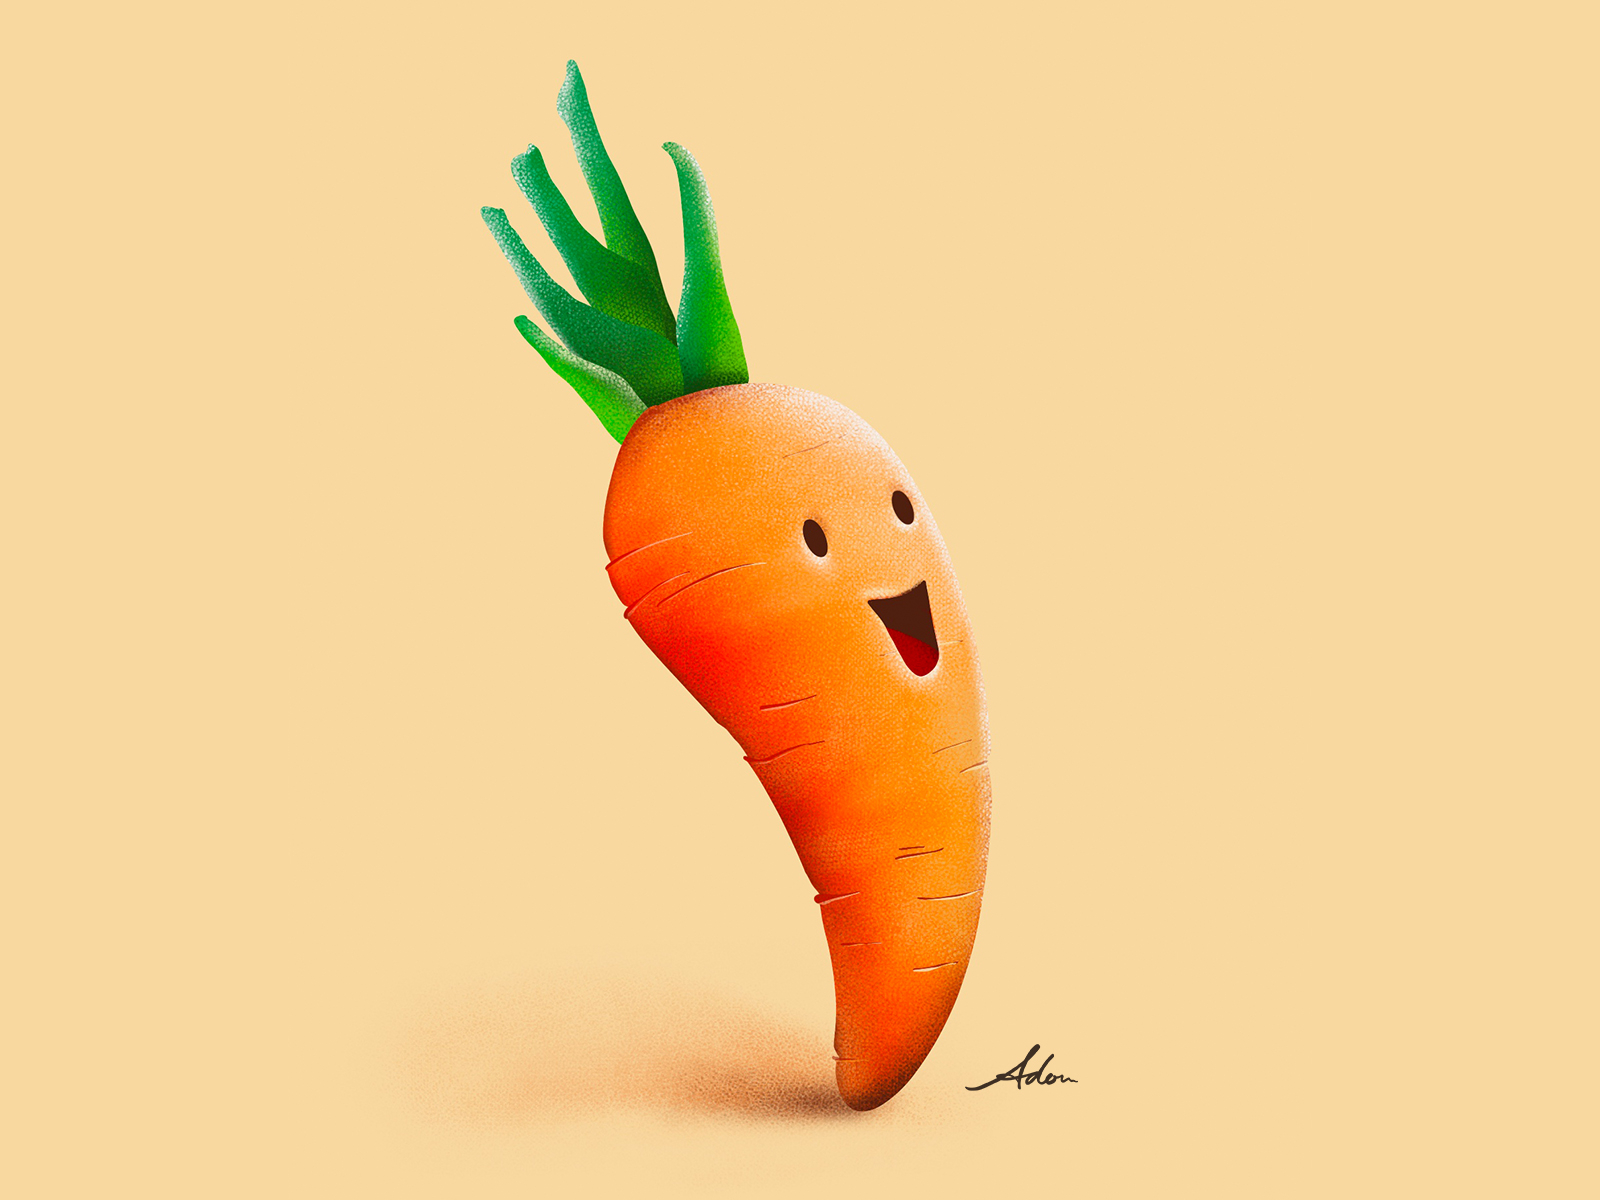 Carrot Procreate drawing | 紅蘿蔔繪畫 by adon on Dribbble